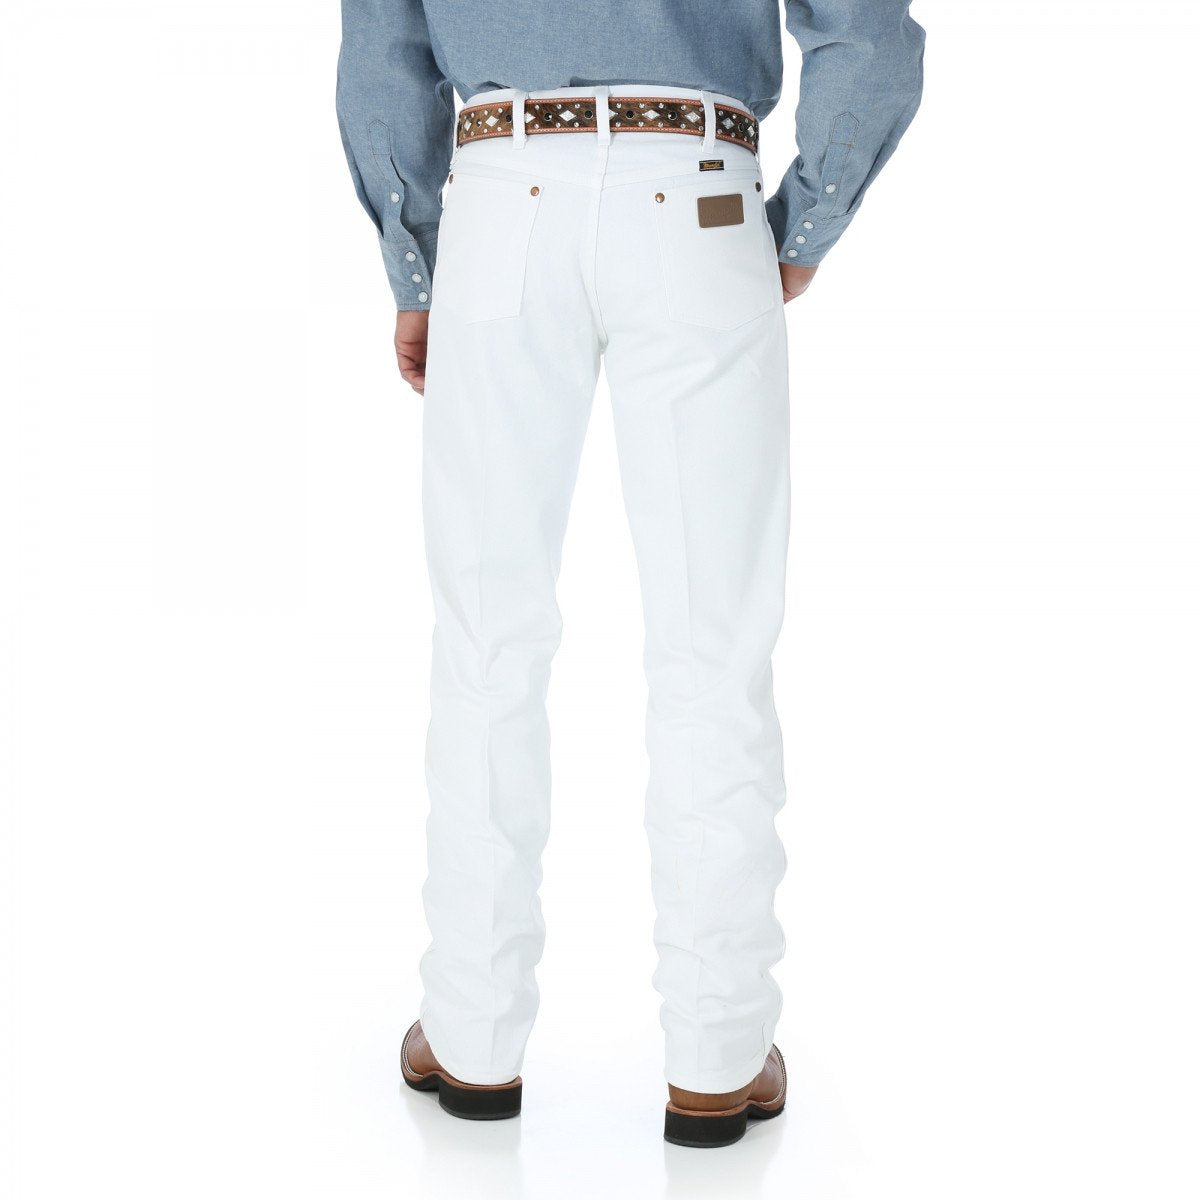 Wrangler Pro Rodeo Competition Jeans